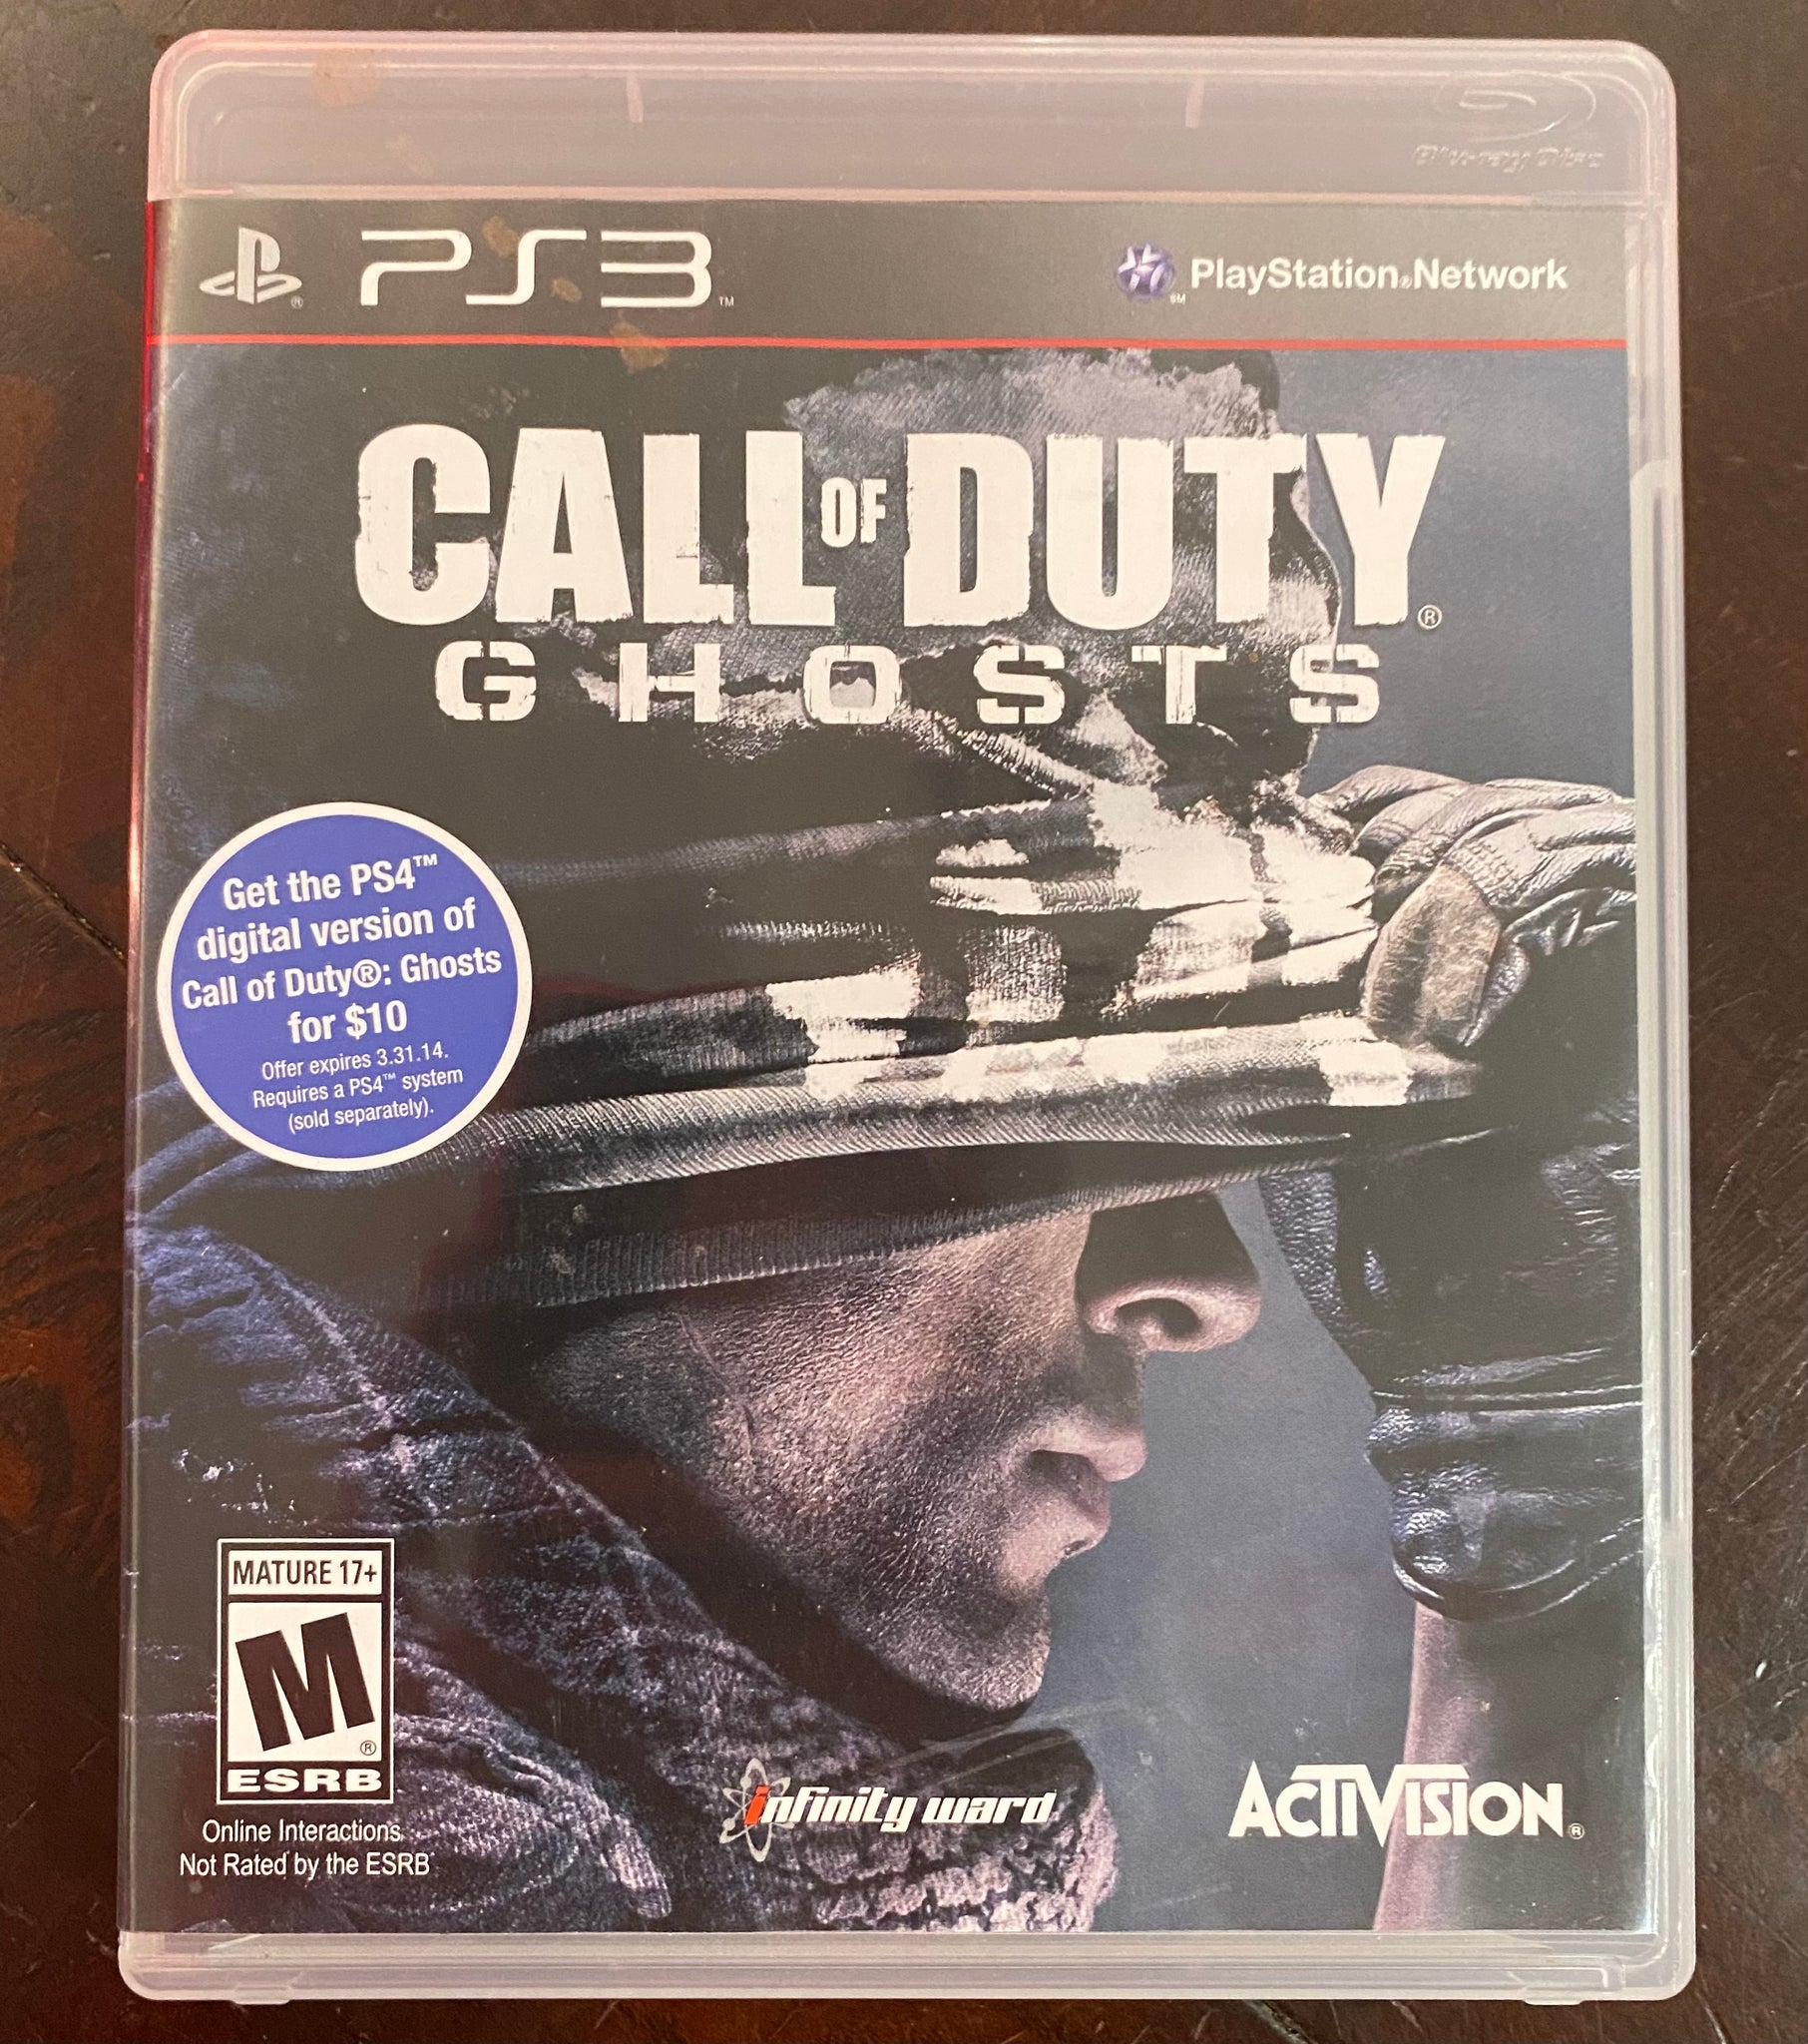  Call of Duty: Ghosts - PlayStation 4 : Activision Inc